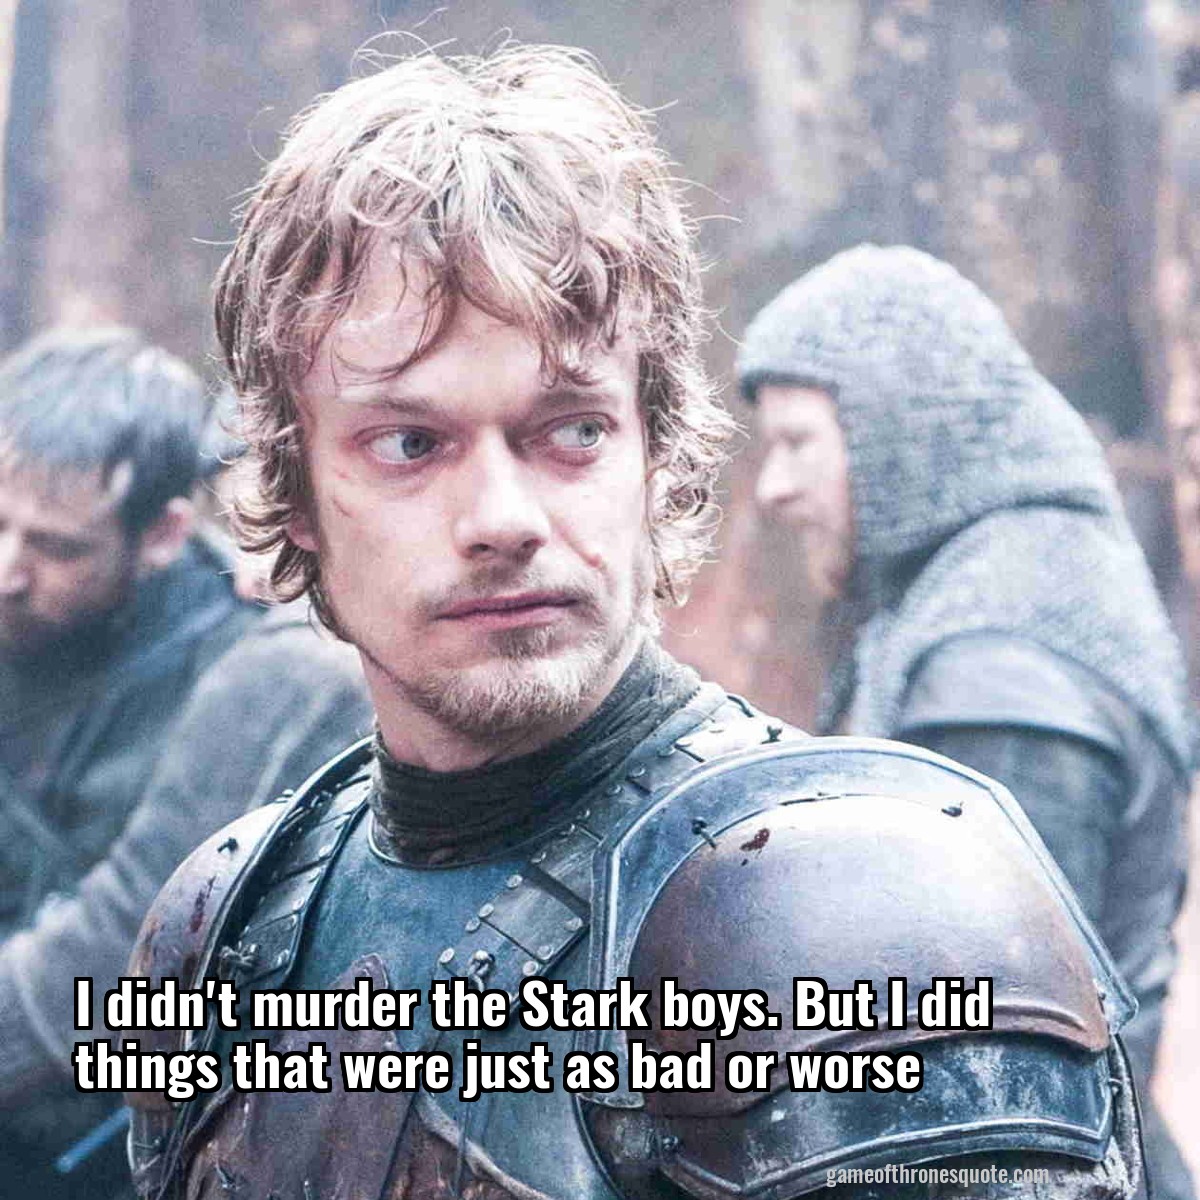 I didn't murder the Stark boys. But I did things that were just as bad or worse